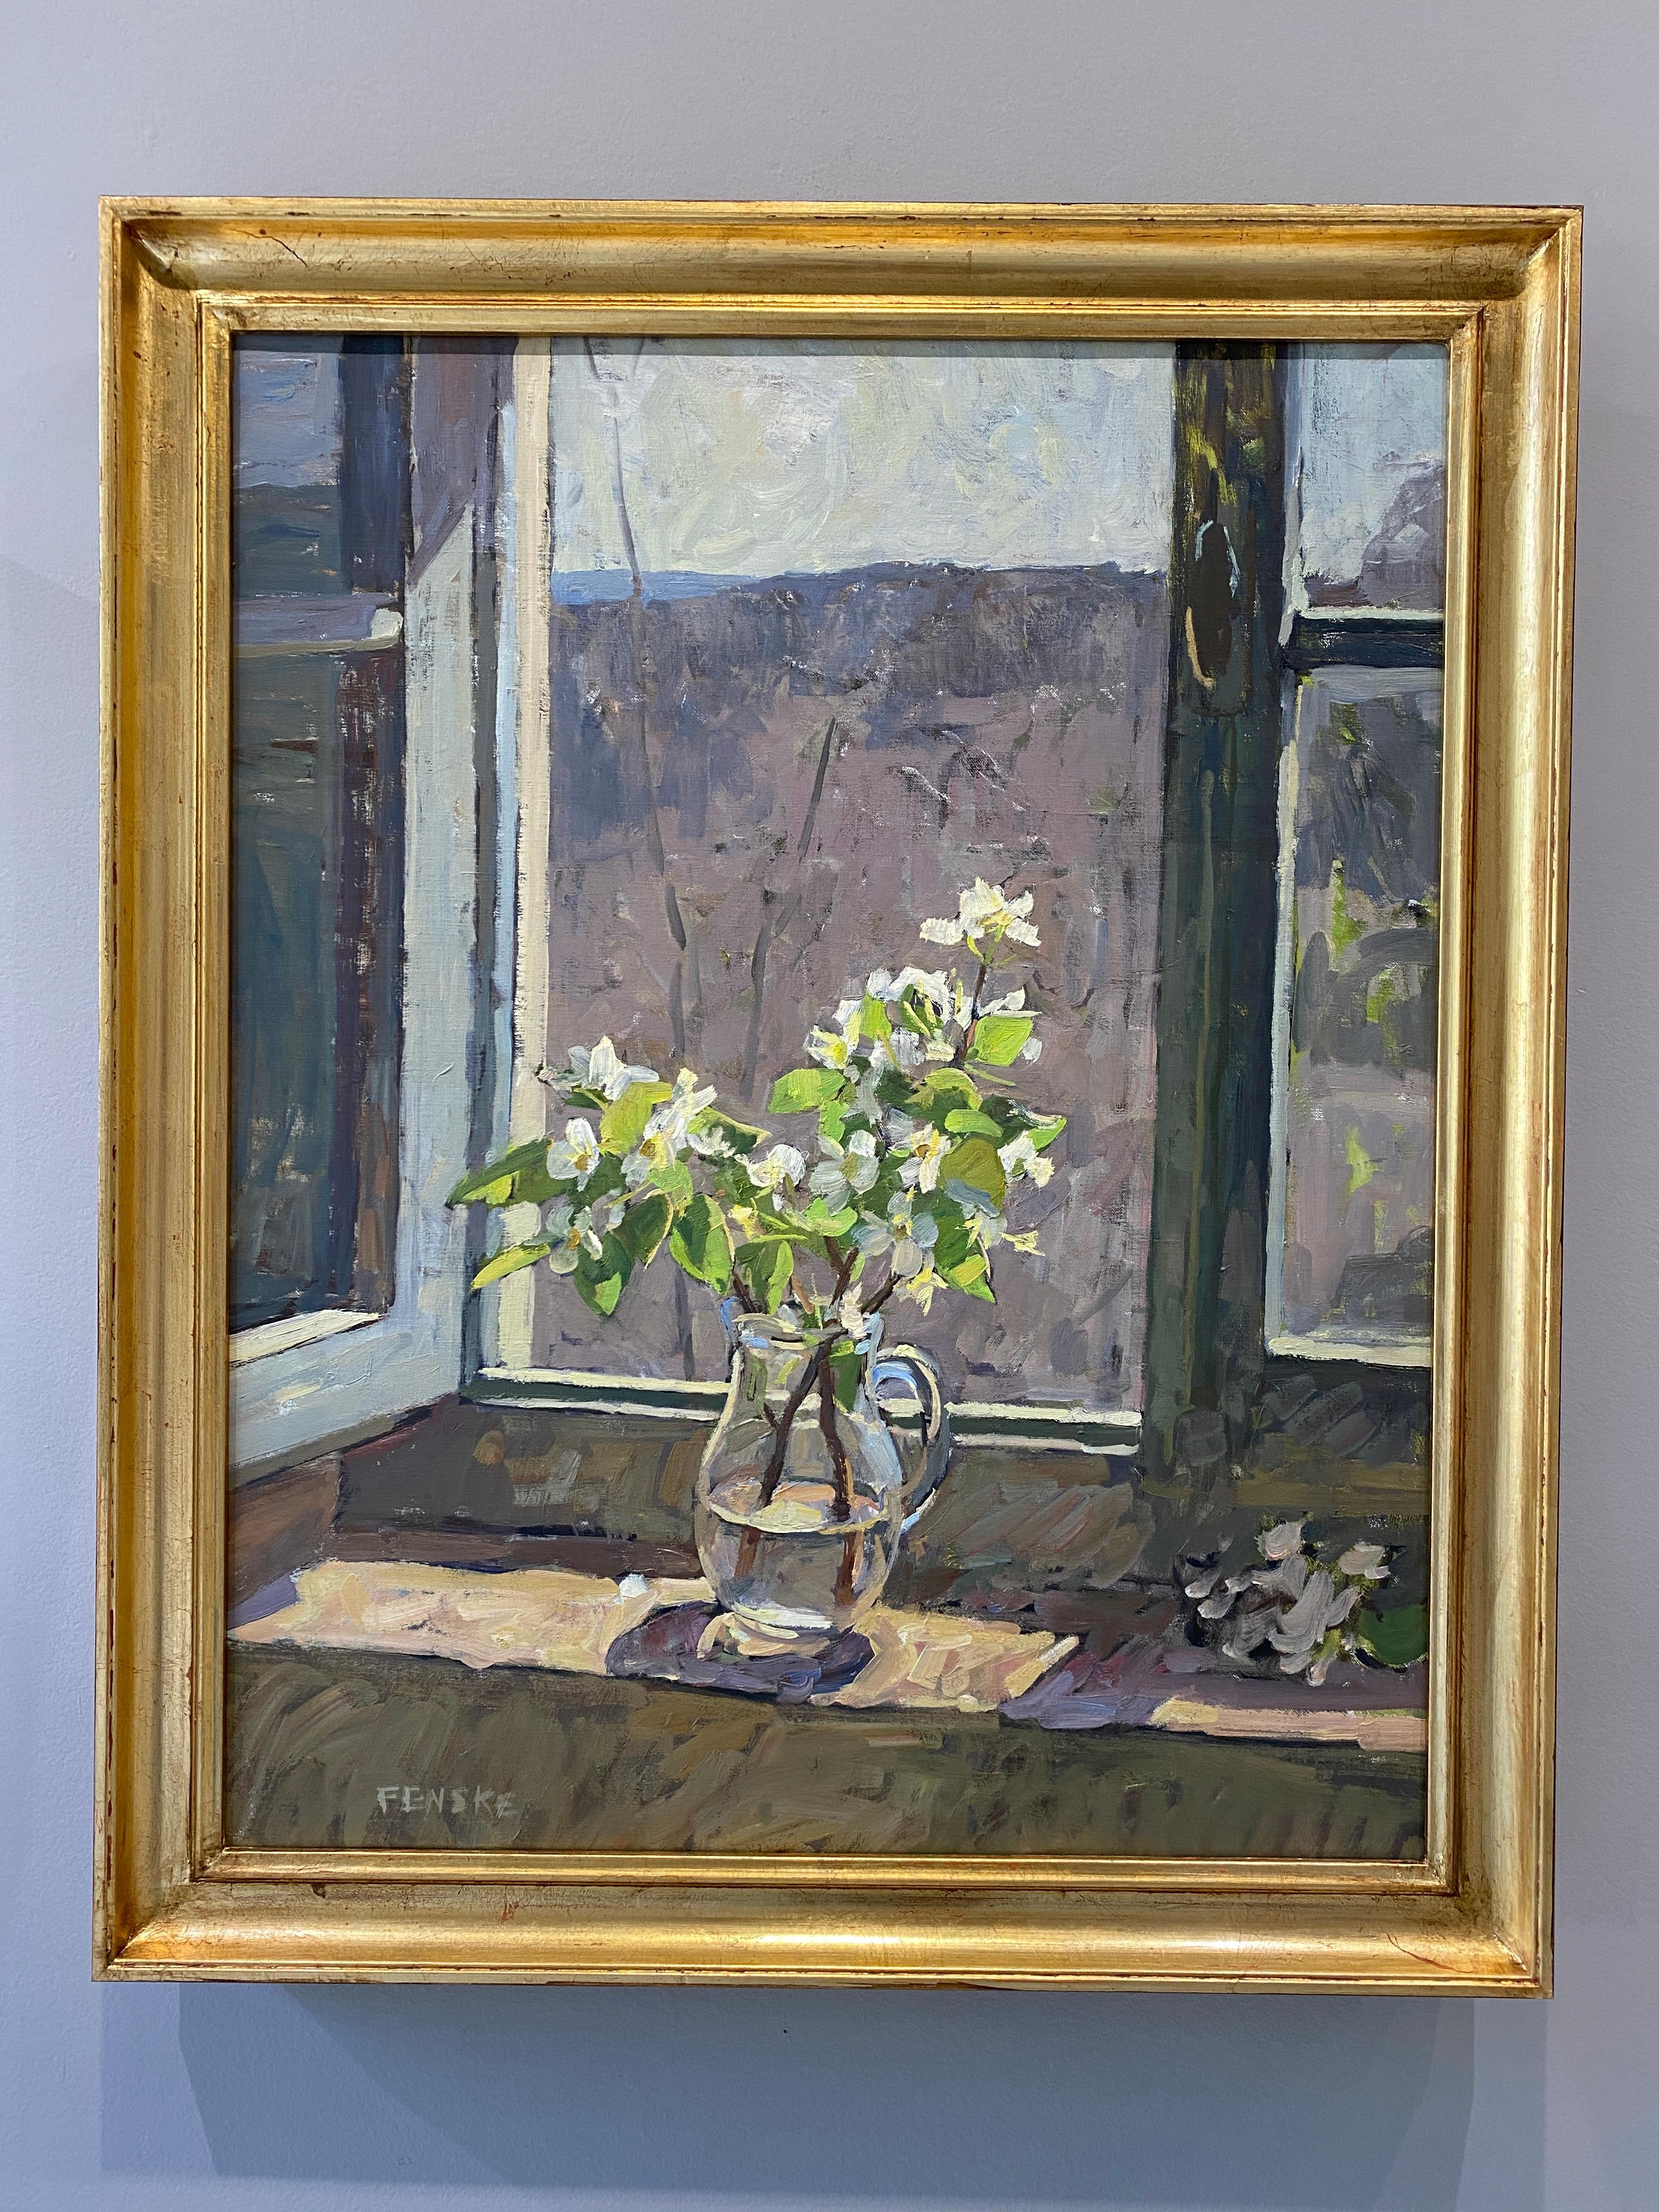 Spring Blossoms - Painting by Ben Fenske